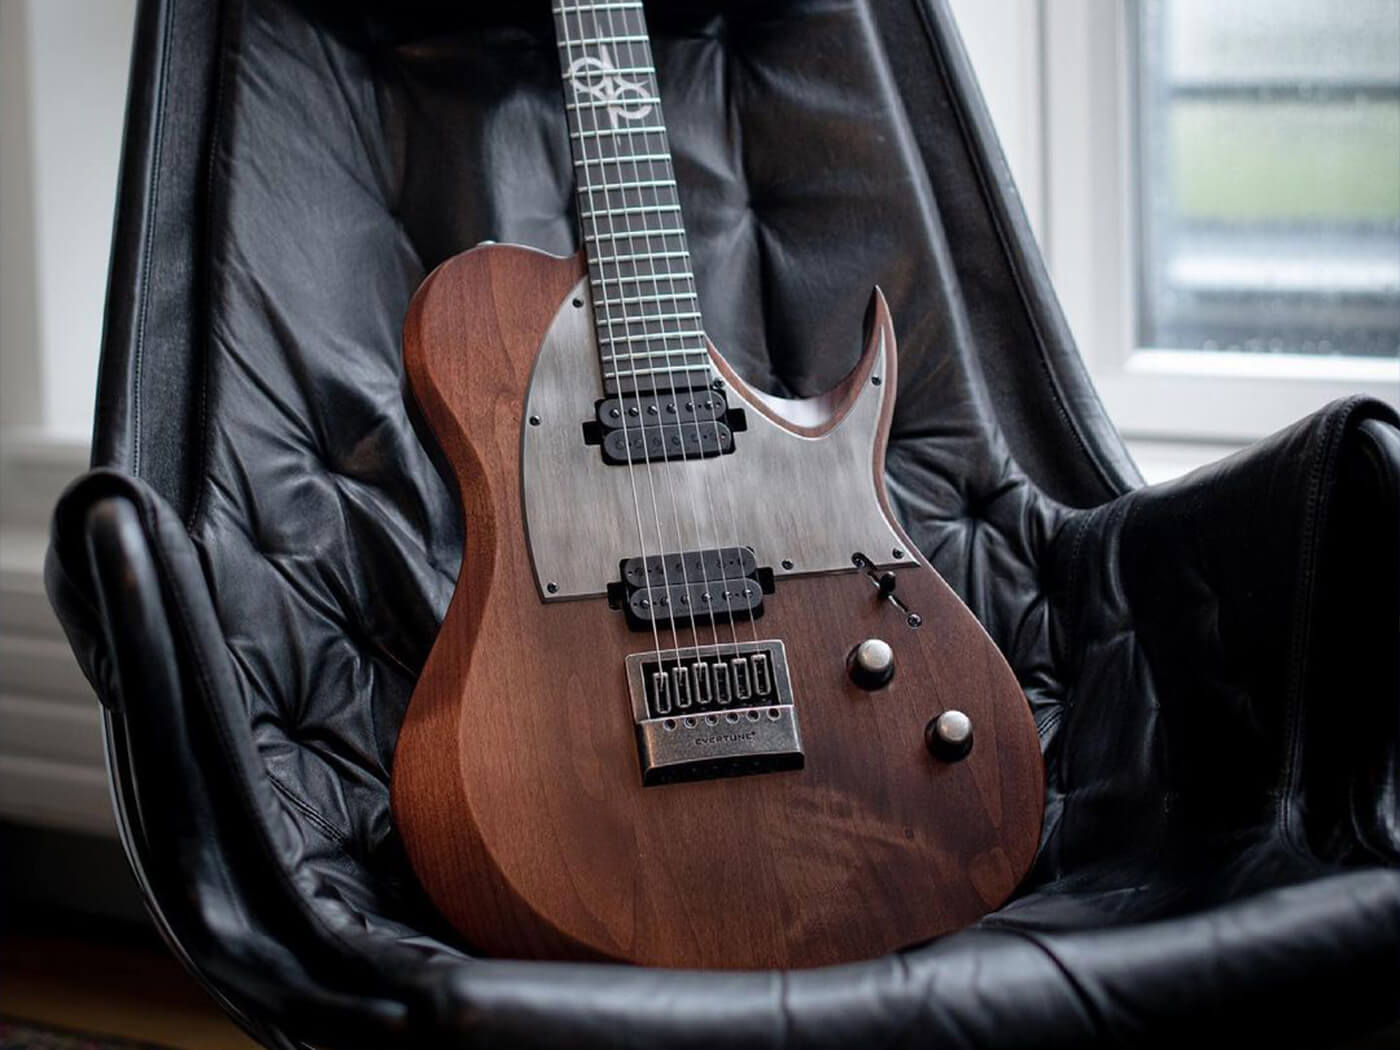 Solar Guitars unveils the T1.6, a pointy, metal-focused | Guitar.com | All Things Guitar